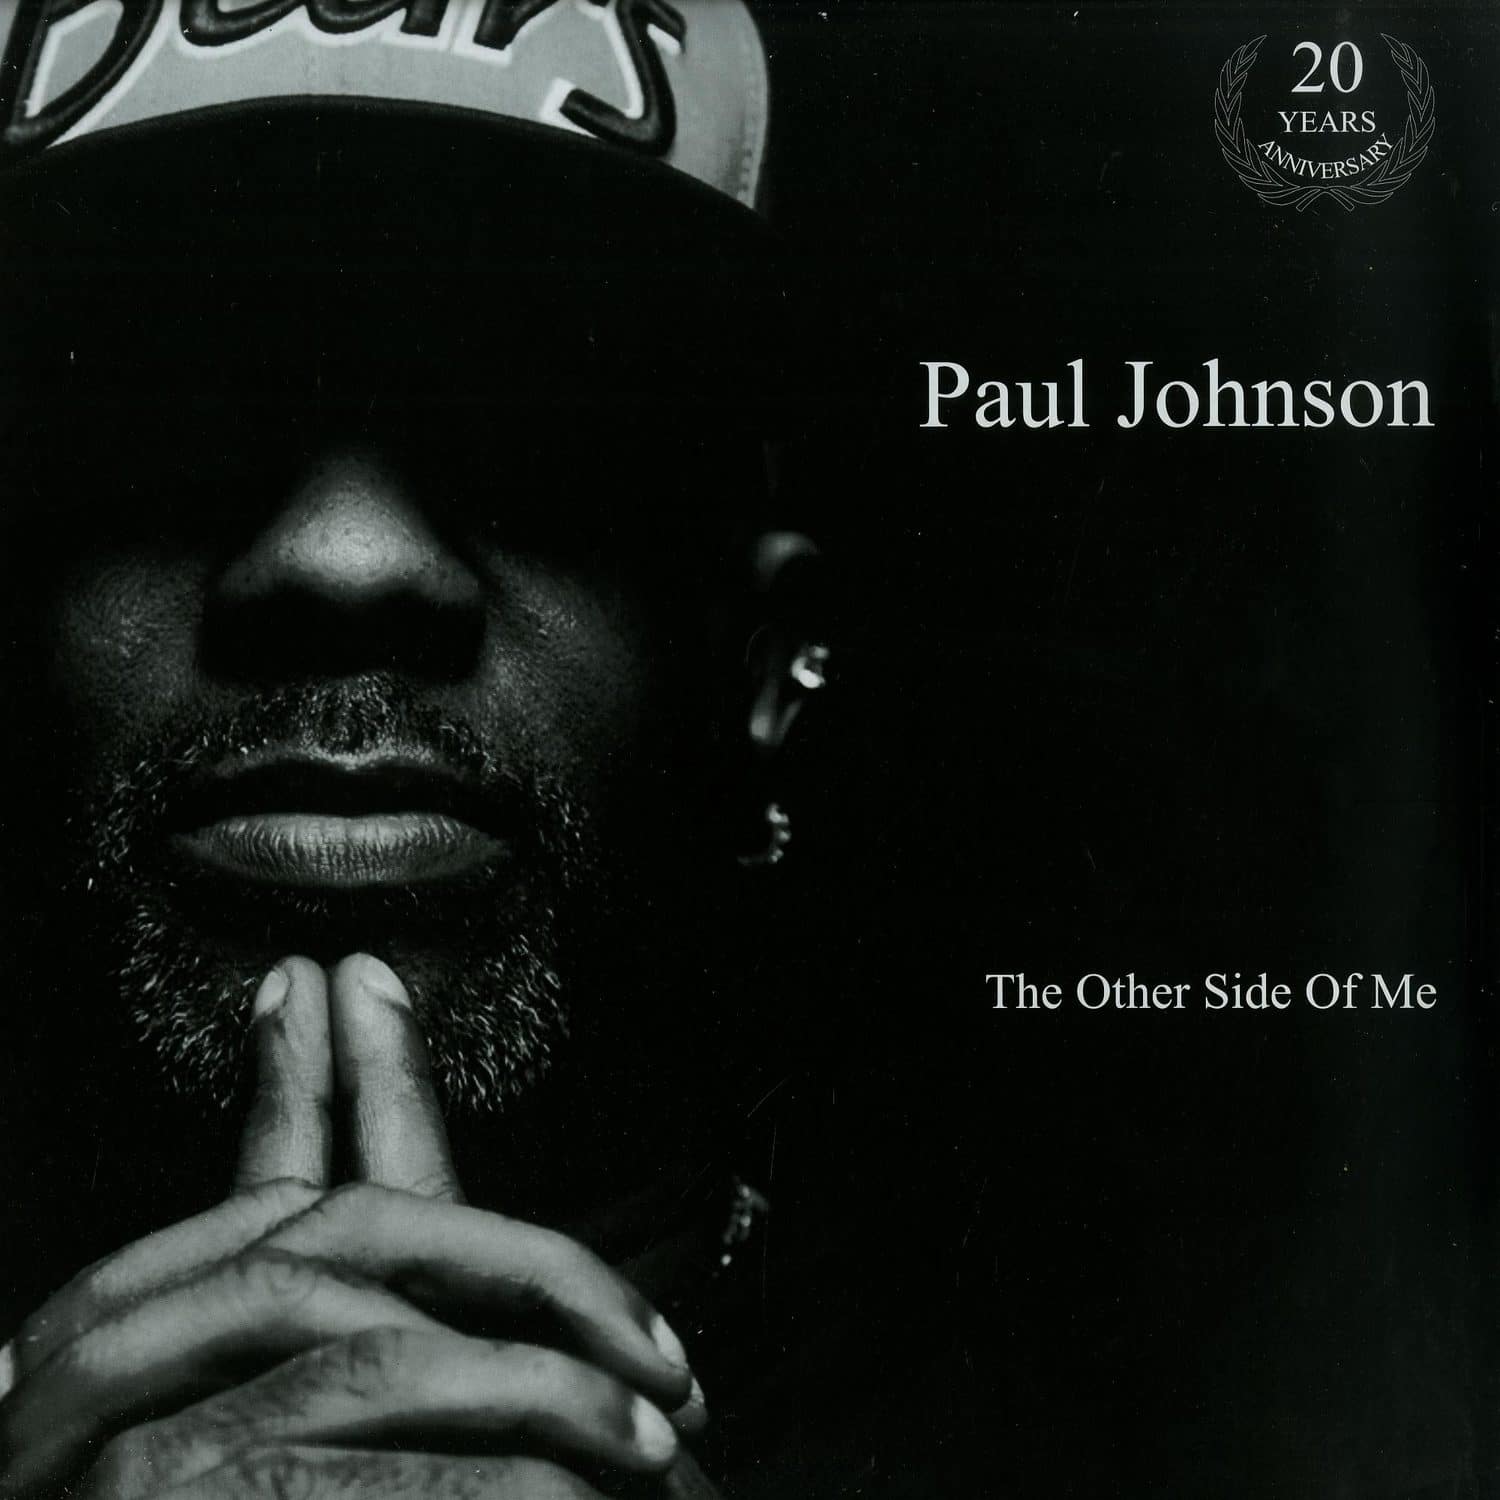 Paul Johnson - THE OTHER SIDE OF ME - 20 YEARS ANNIVERSARY ALBUM EDITION 